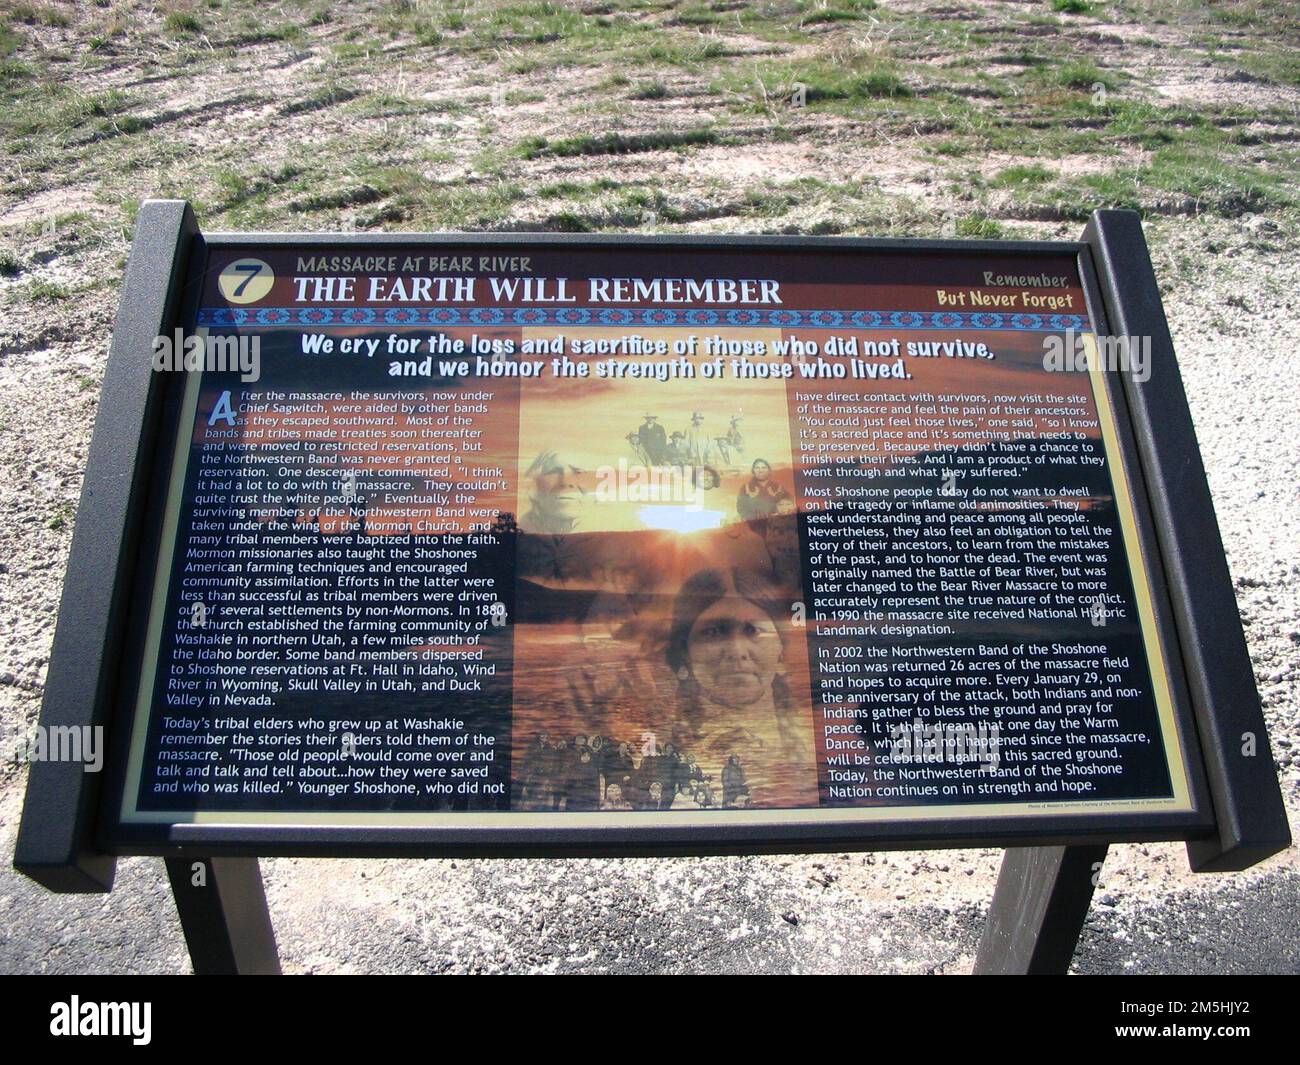 Pioneer Historic Byway - Interpretive Sign at Bear River Massacre Site: 'The Earth will Remember'. We cry for the loss and sacrifice of those who did not survive and we honor the strength of those who lived is the proud declaration on this interpretive sign at the site of the largest Indian massacre in the West. The aftermath of the massacre on the Shoshone is described. Location: Bear River Massacre Overlook, Idaho (42.151° N 111.908° W) Stock Photo